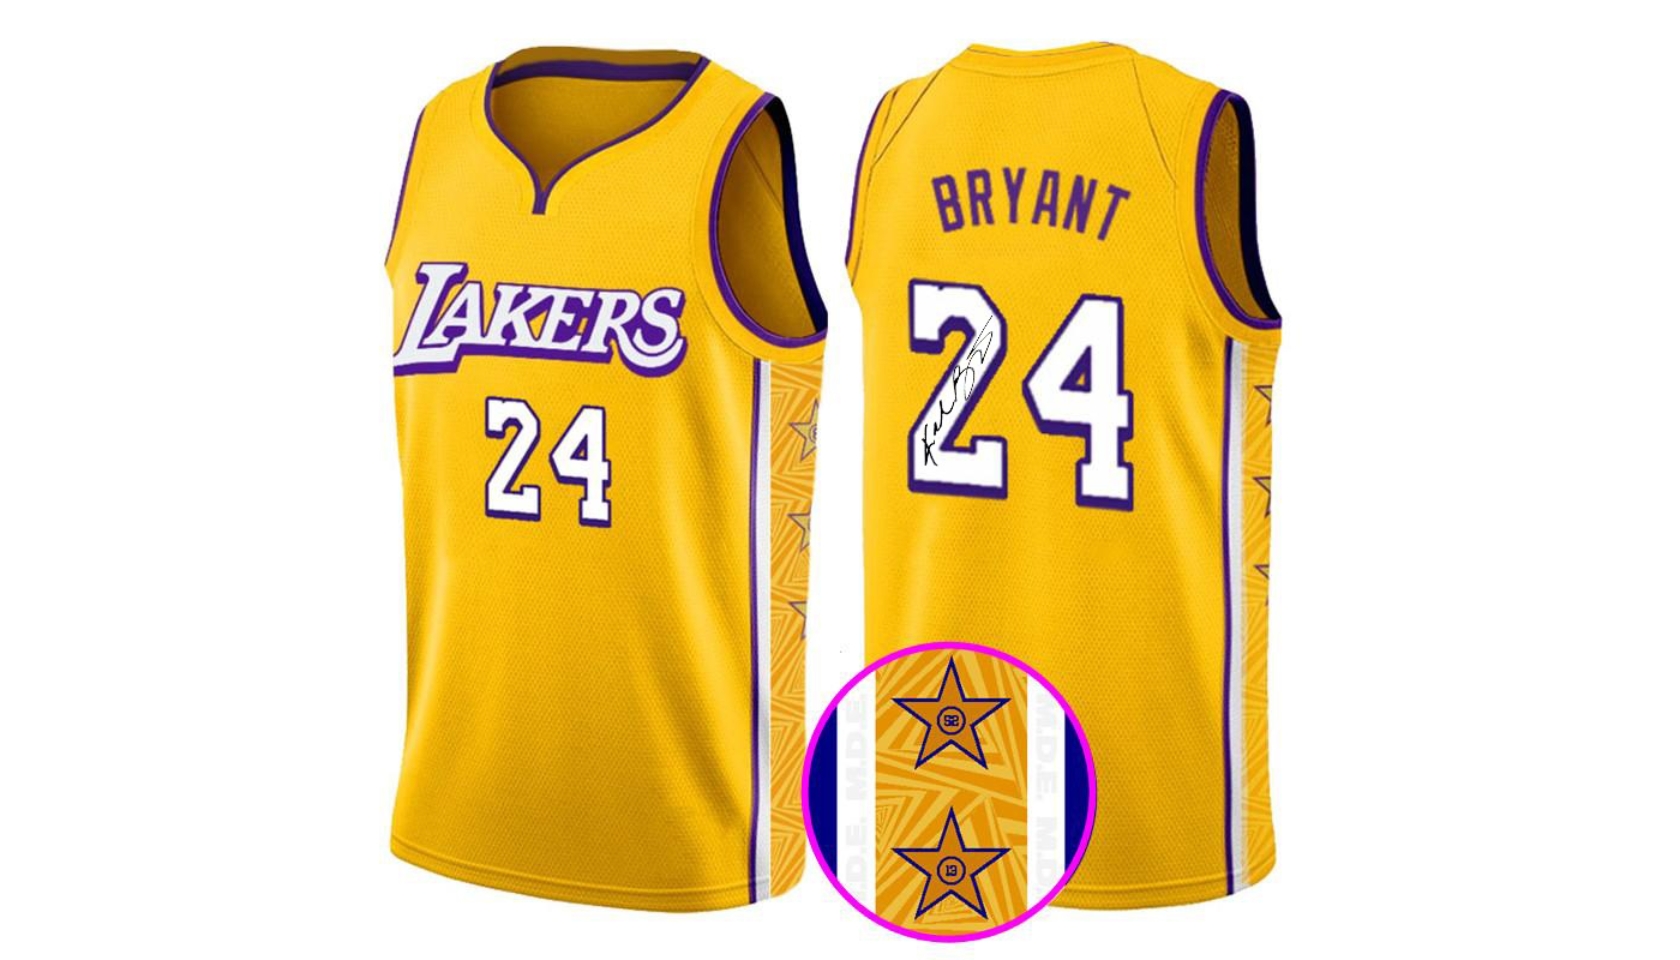 Kobe Bryant Signed Lakers Jersey Print - Perfect gift for the